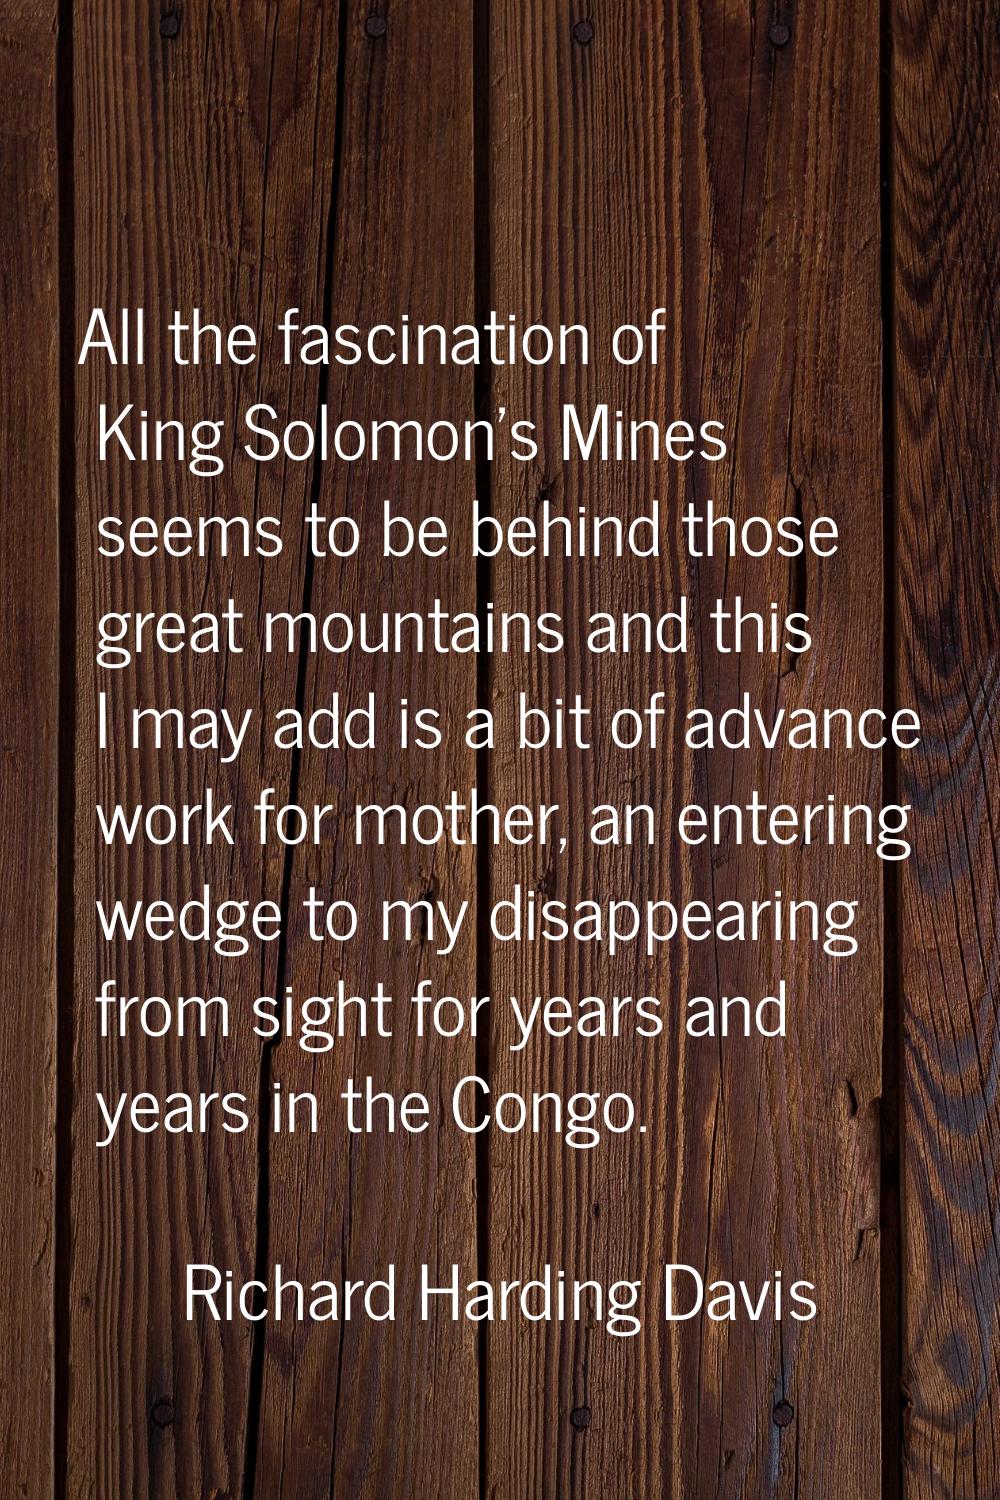 All the fascination of King Solomon's Mines seems to be behind those great mountains and this I may